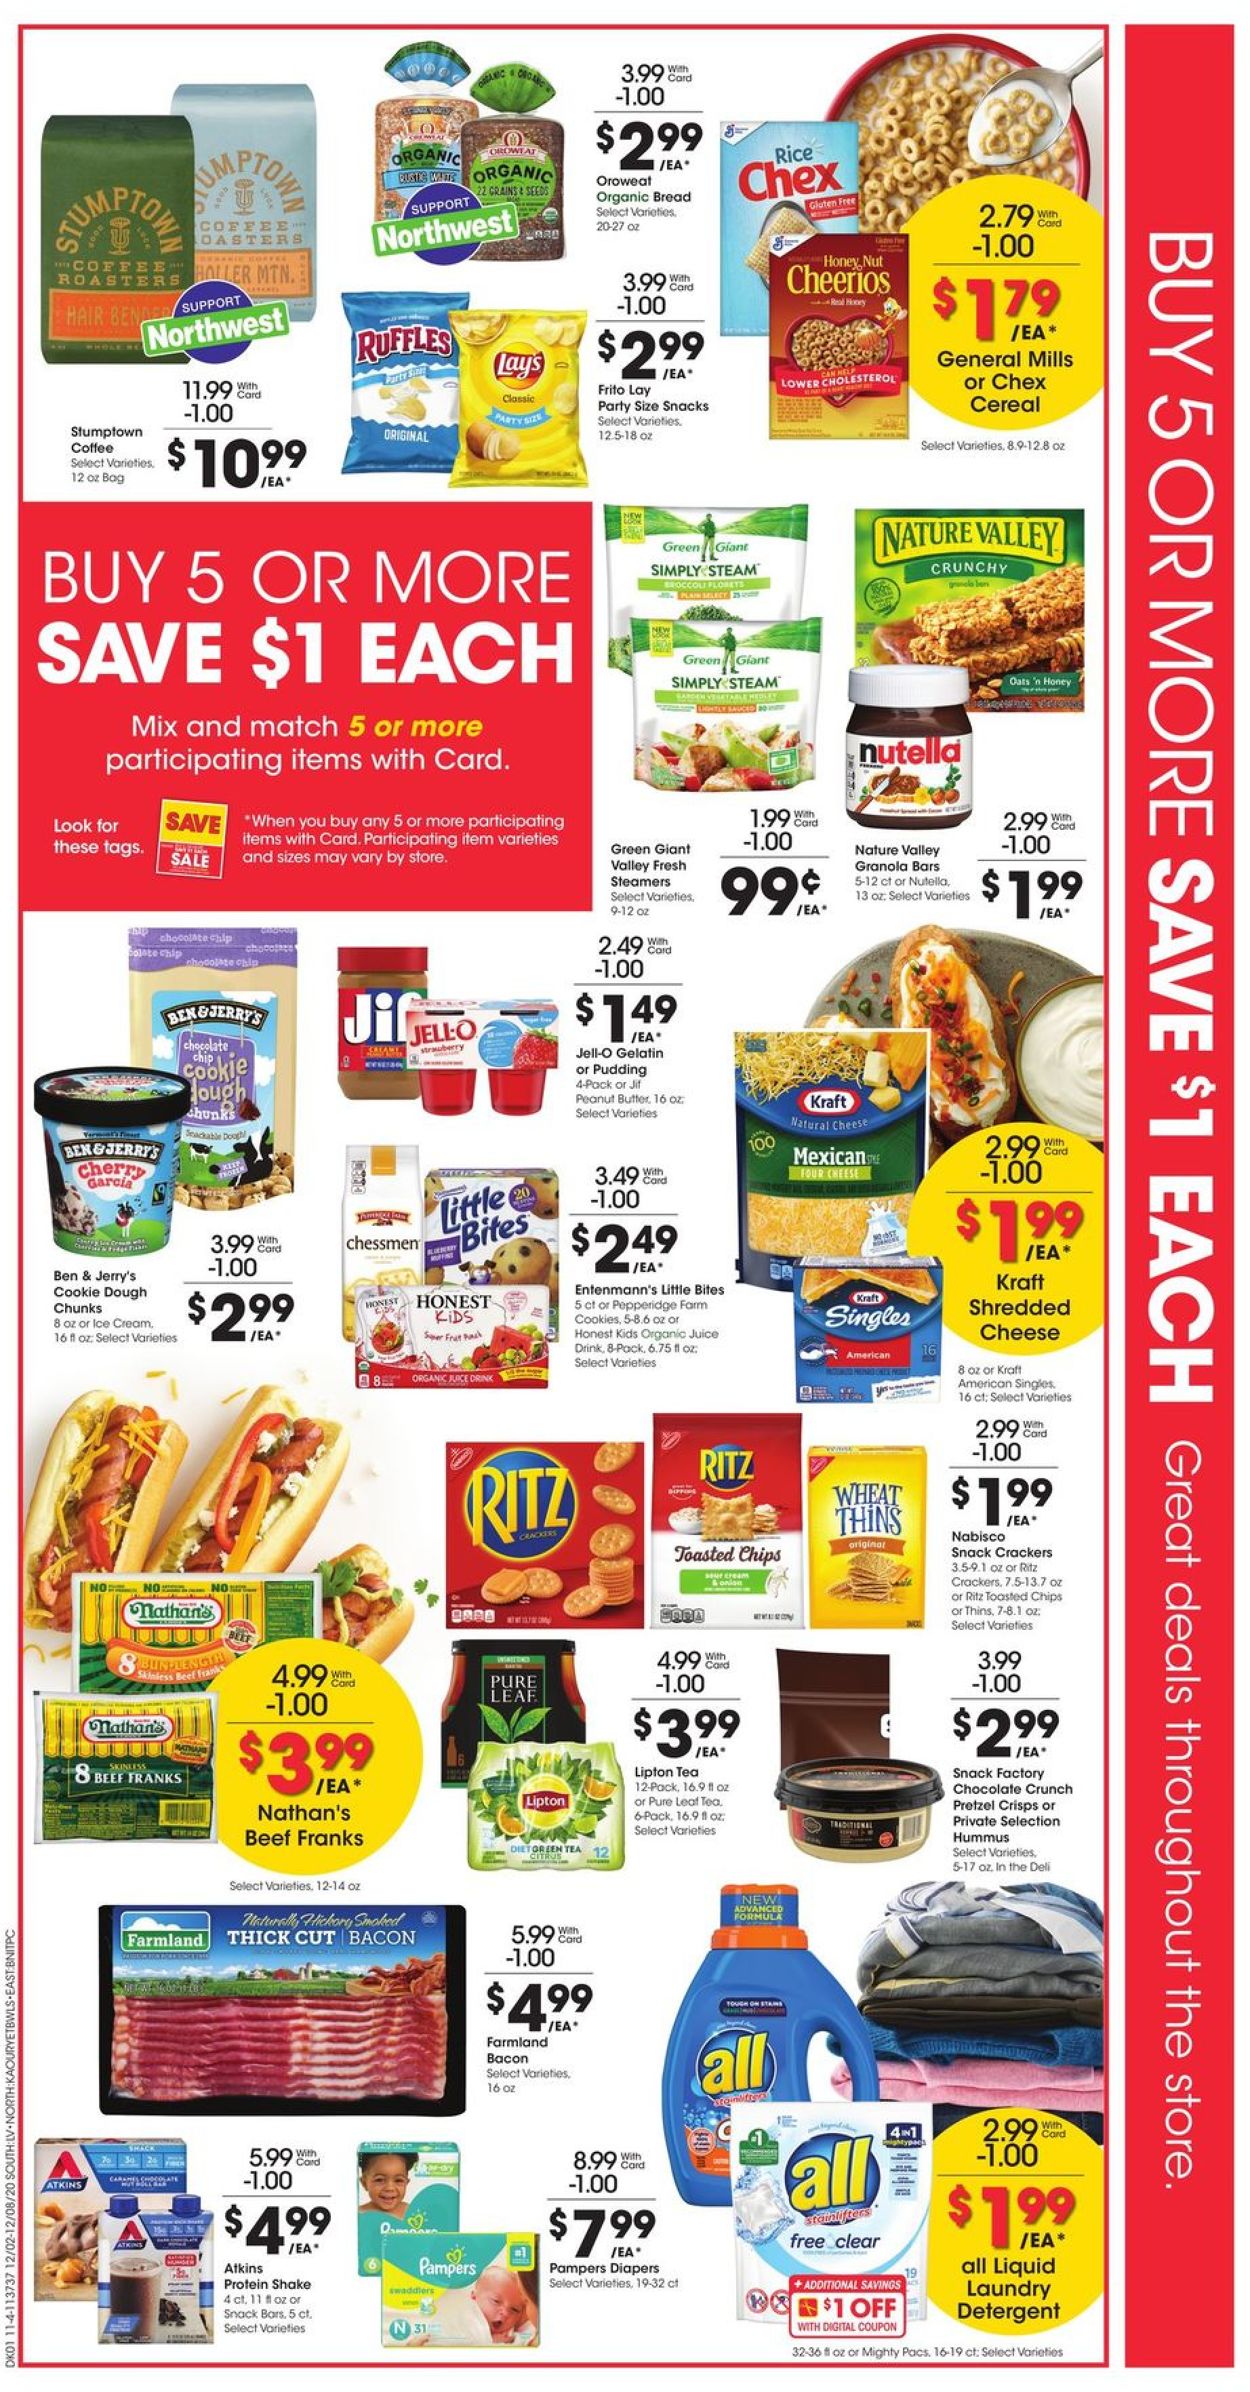 Fred Meyer Current weekly ad 12/02 12/08/2020 [8]